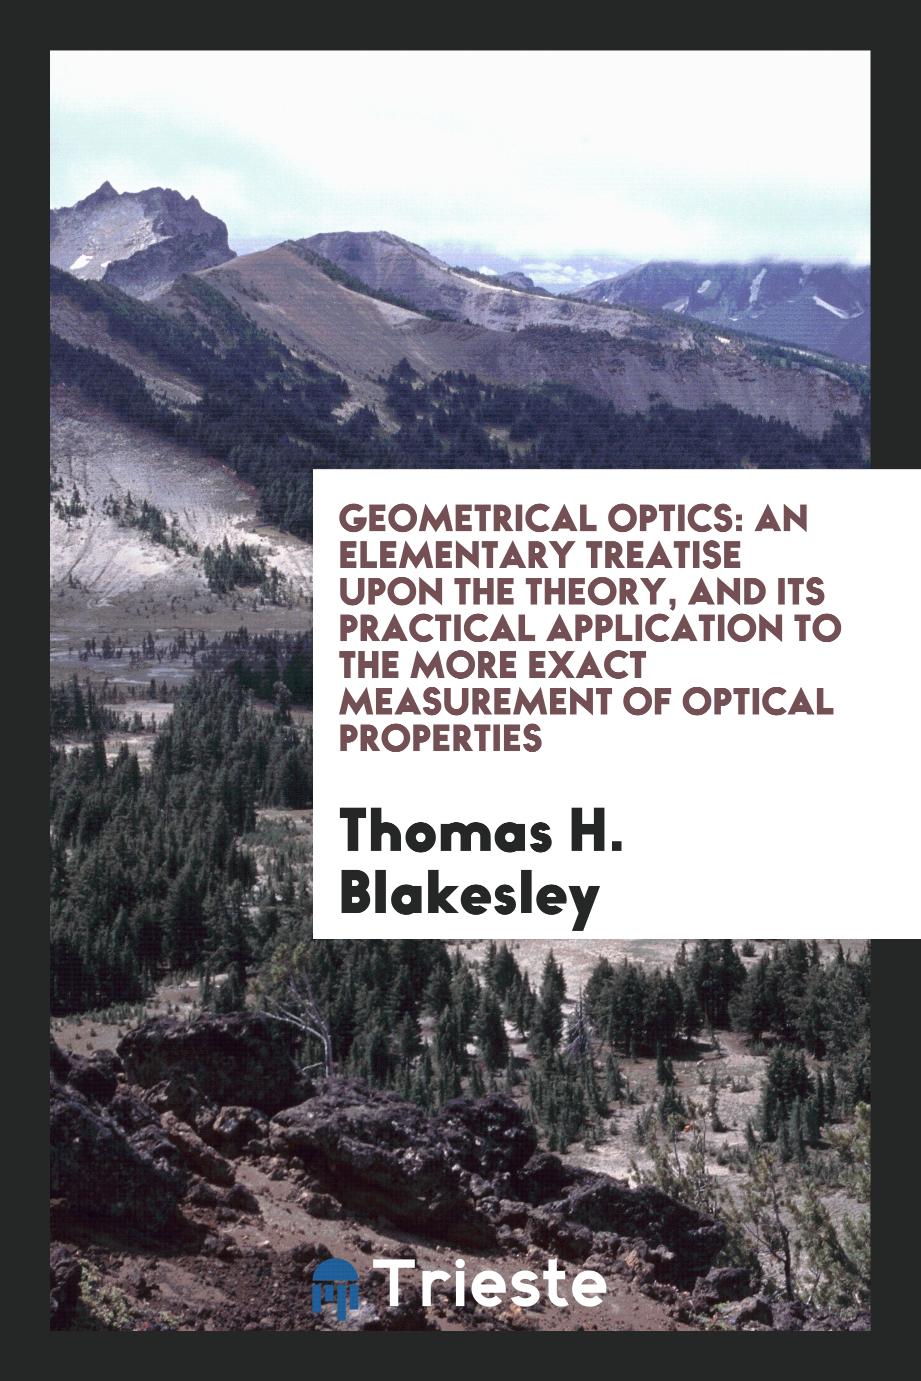 Geometrical Optics: An Elementary Treatise Upon the Theory, and Its Practical Application to the More Exact Measurement of Optical Properties